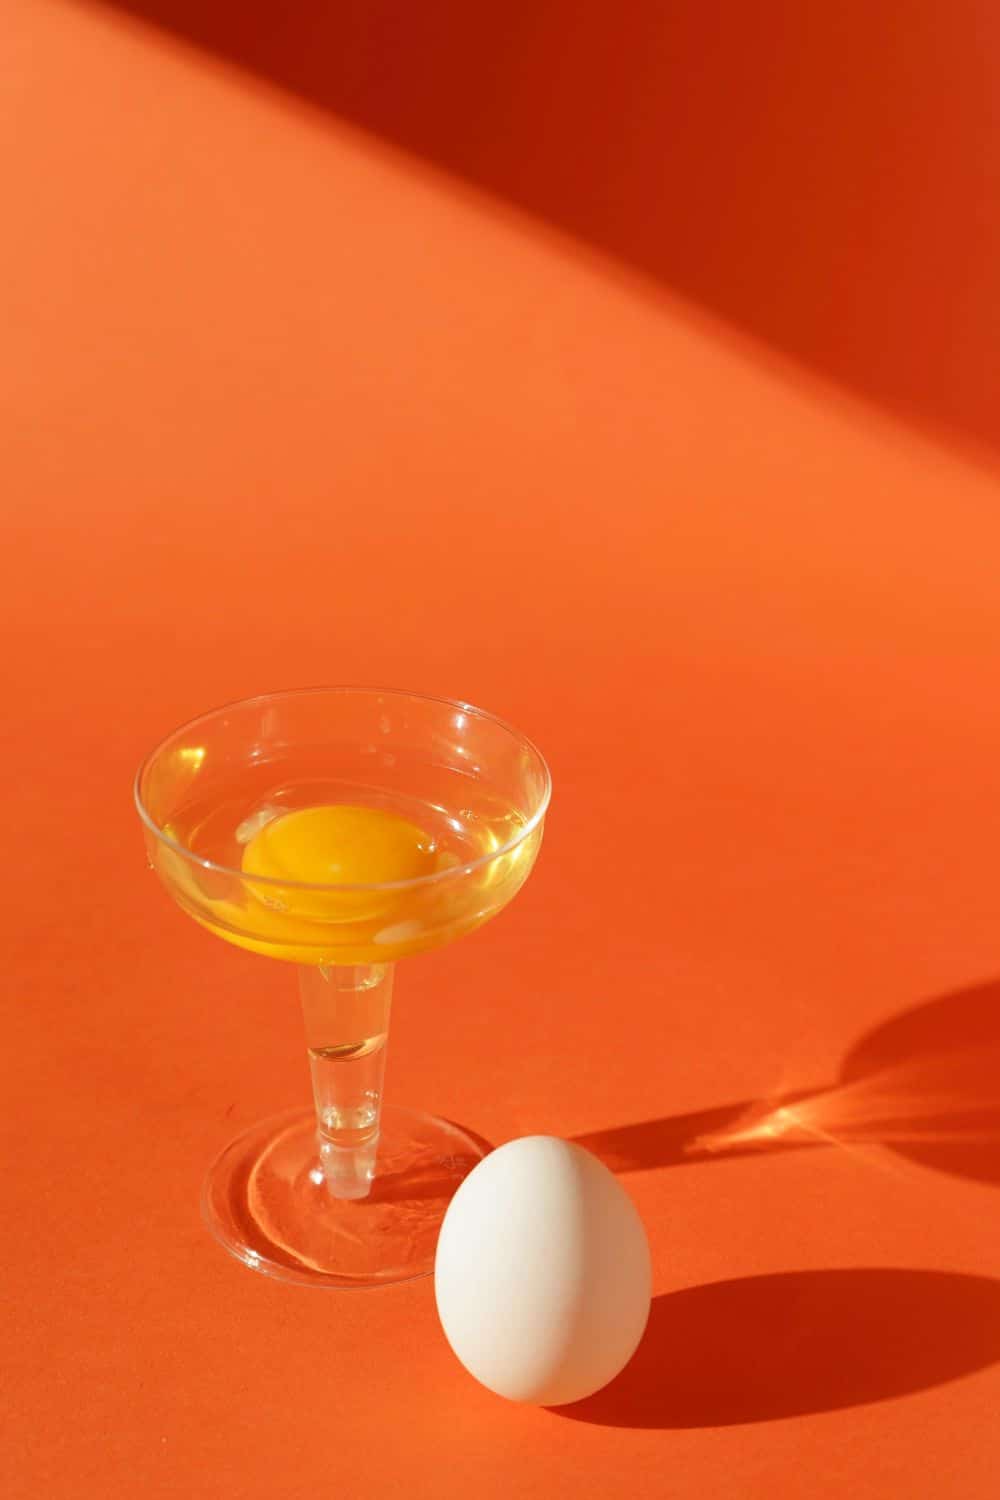 A whole egg and a cracked egg in martini glass